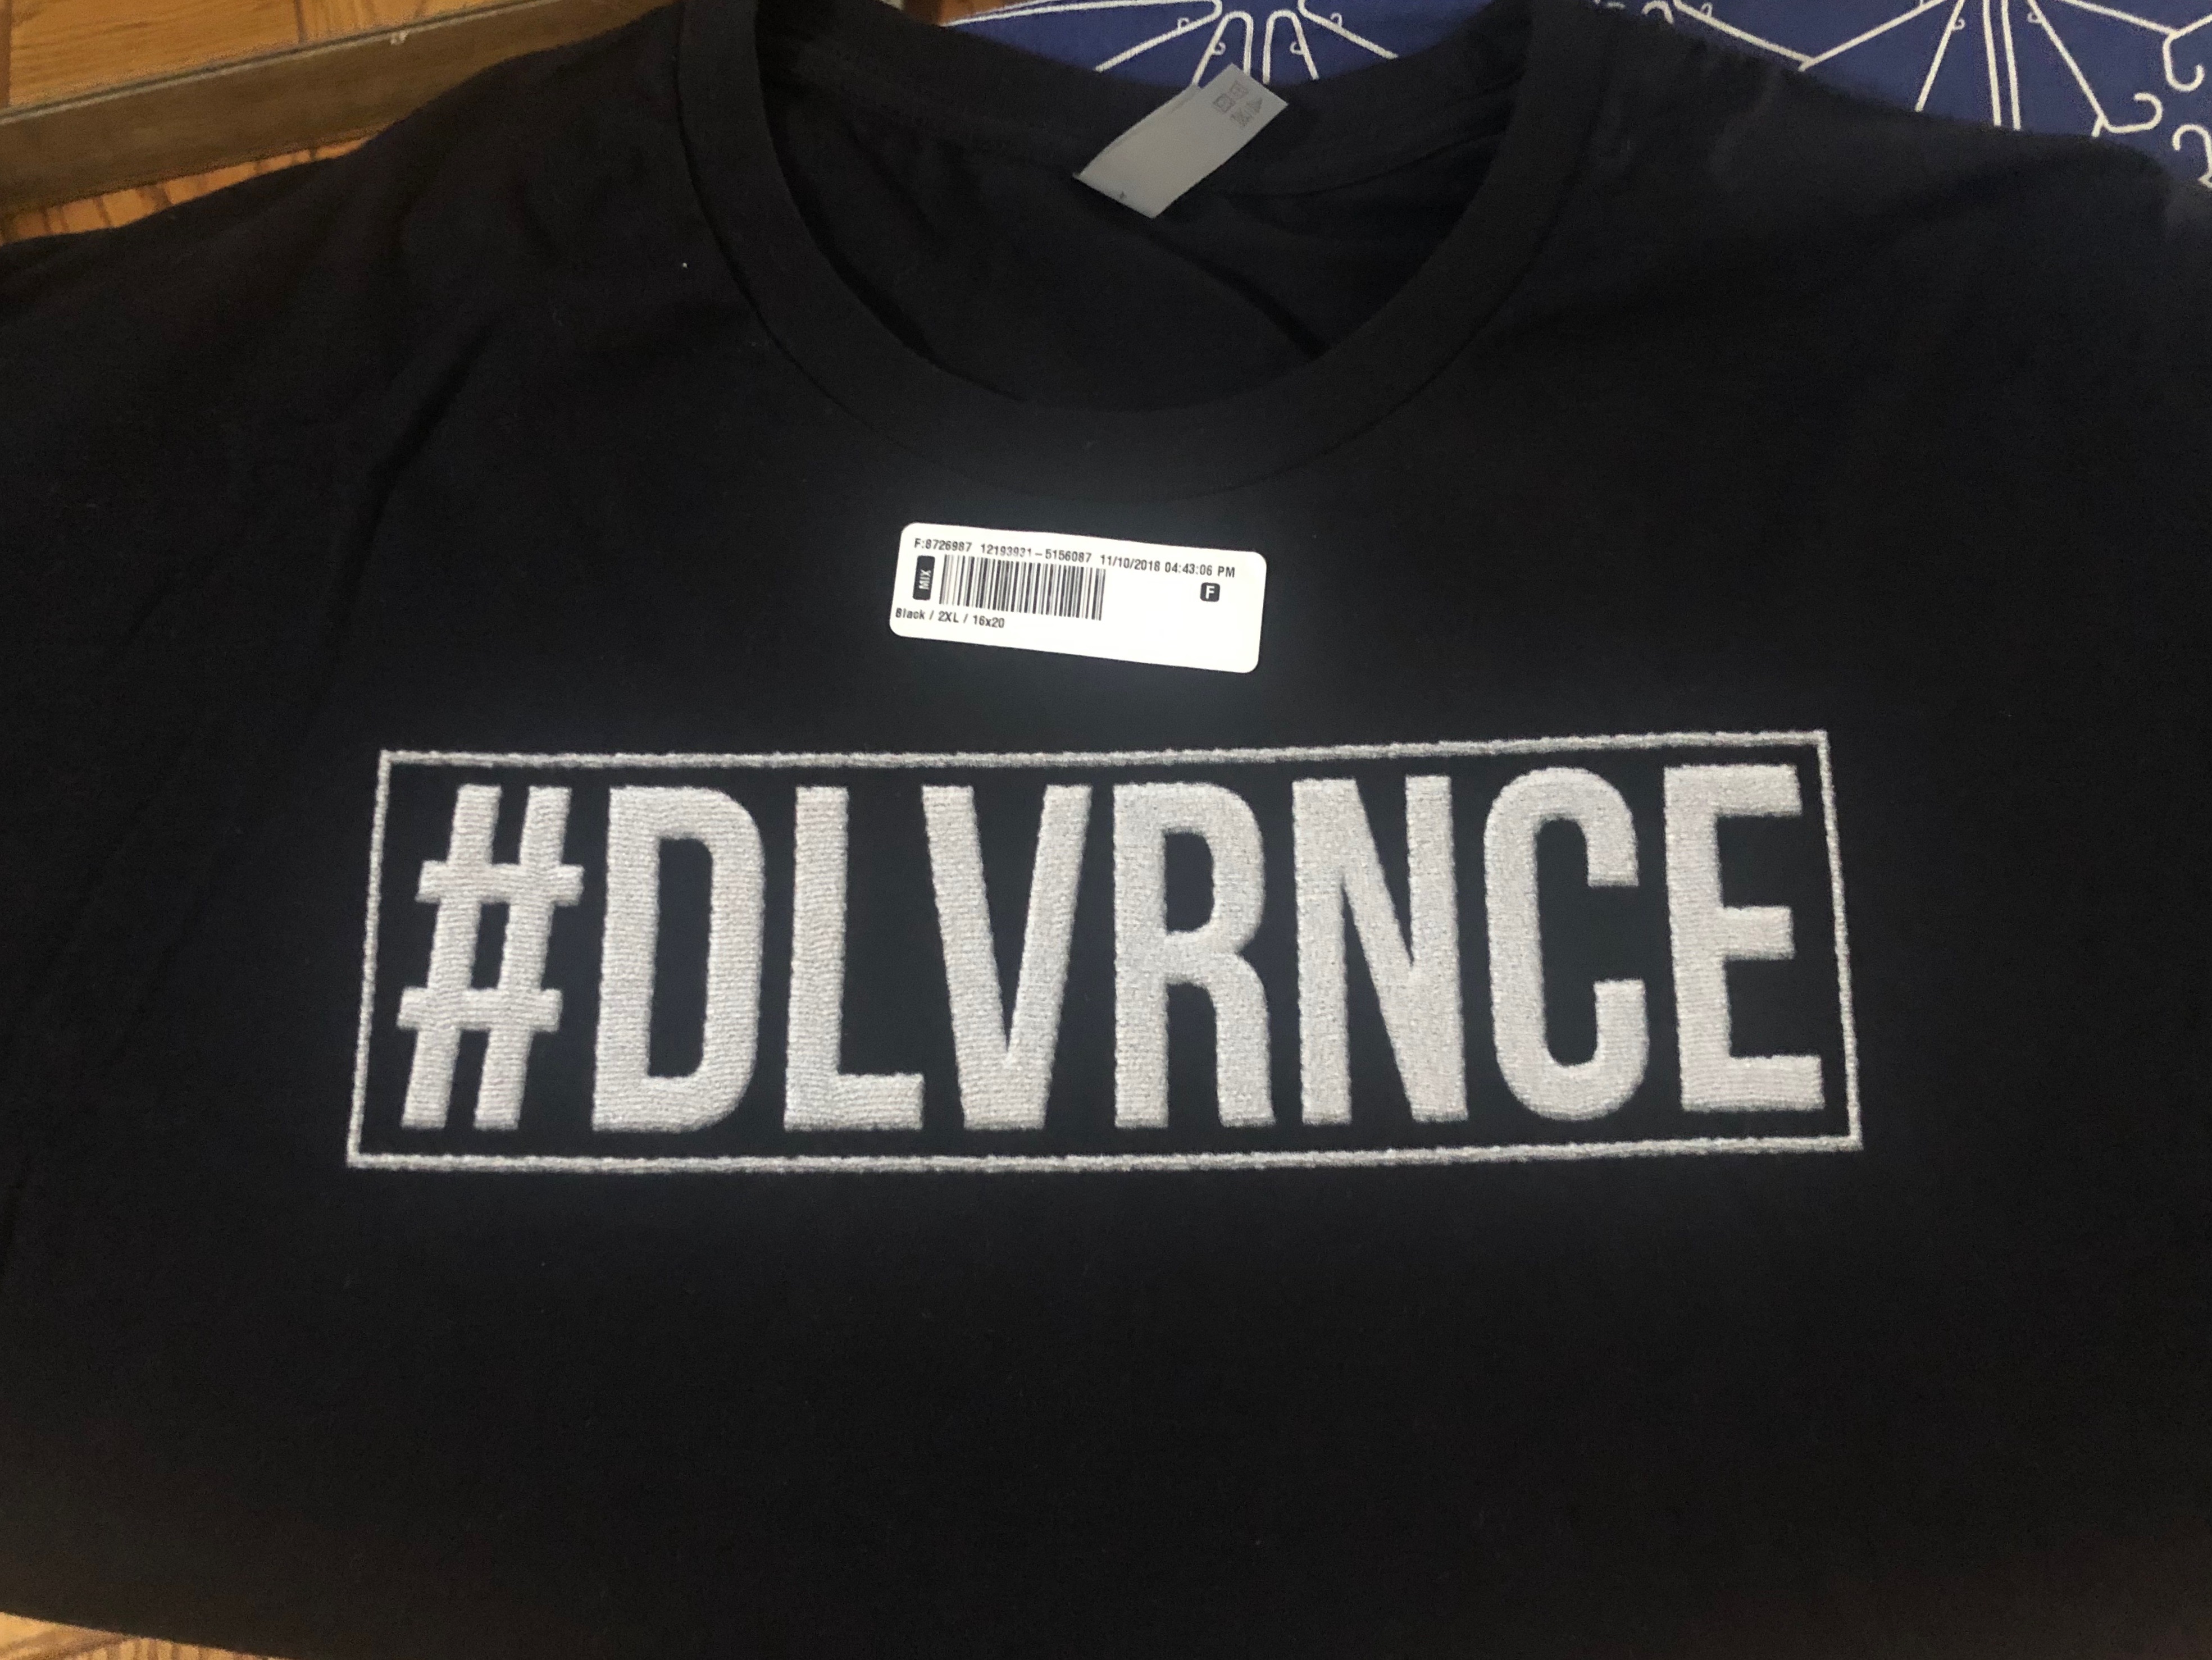 A black shirt with the word # dlvrnce on it.